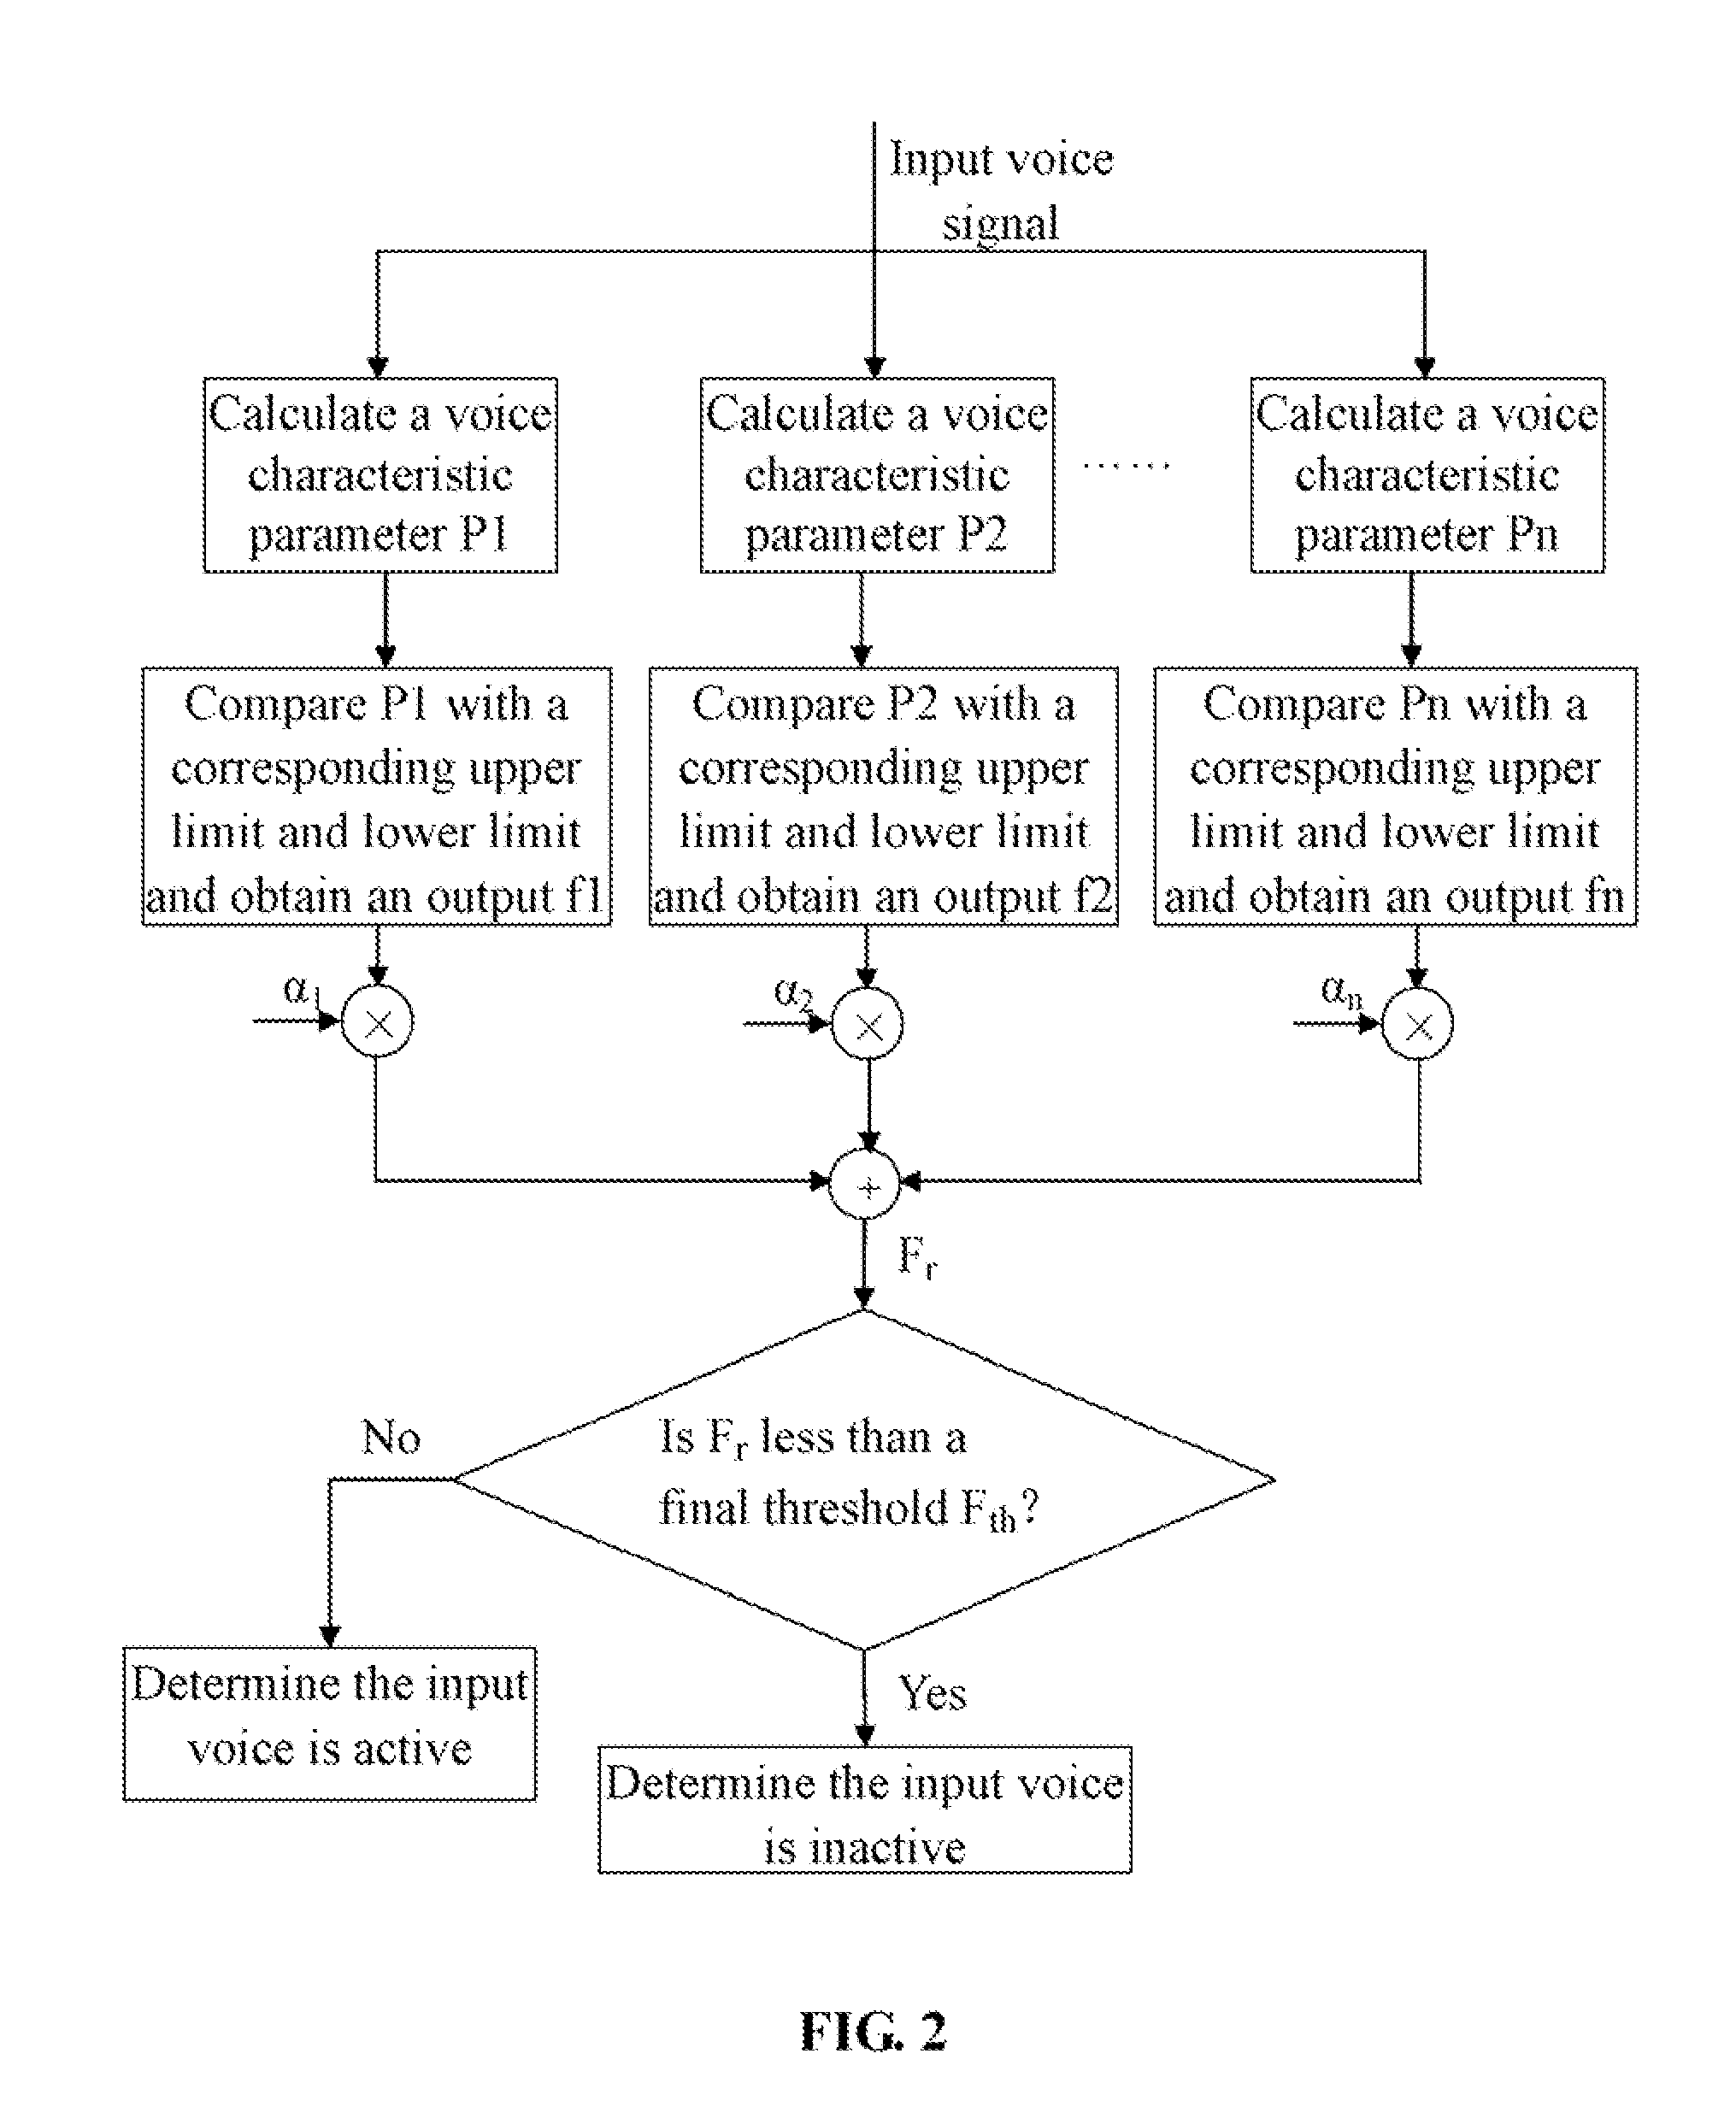 Automatic disconnection system and method of a communication device